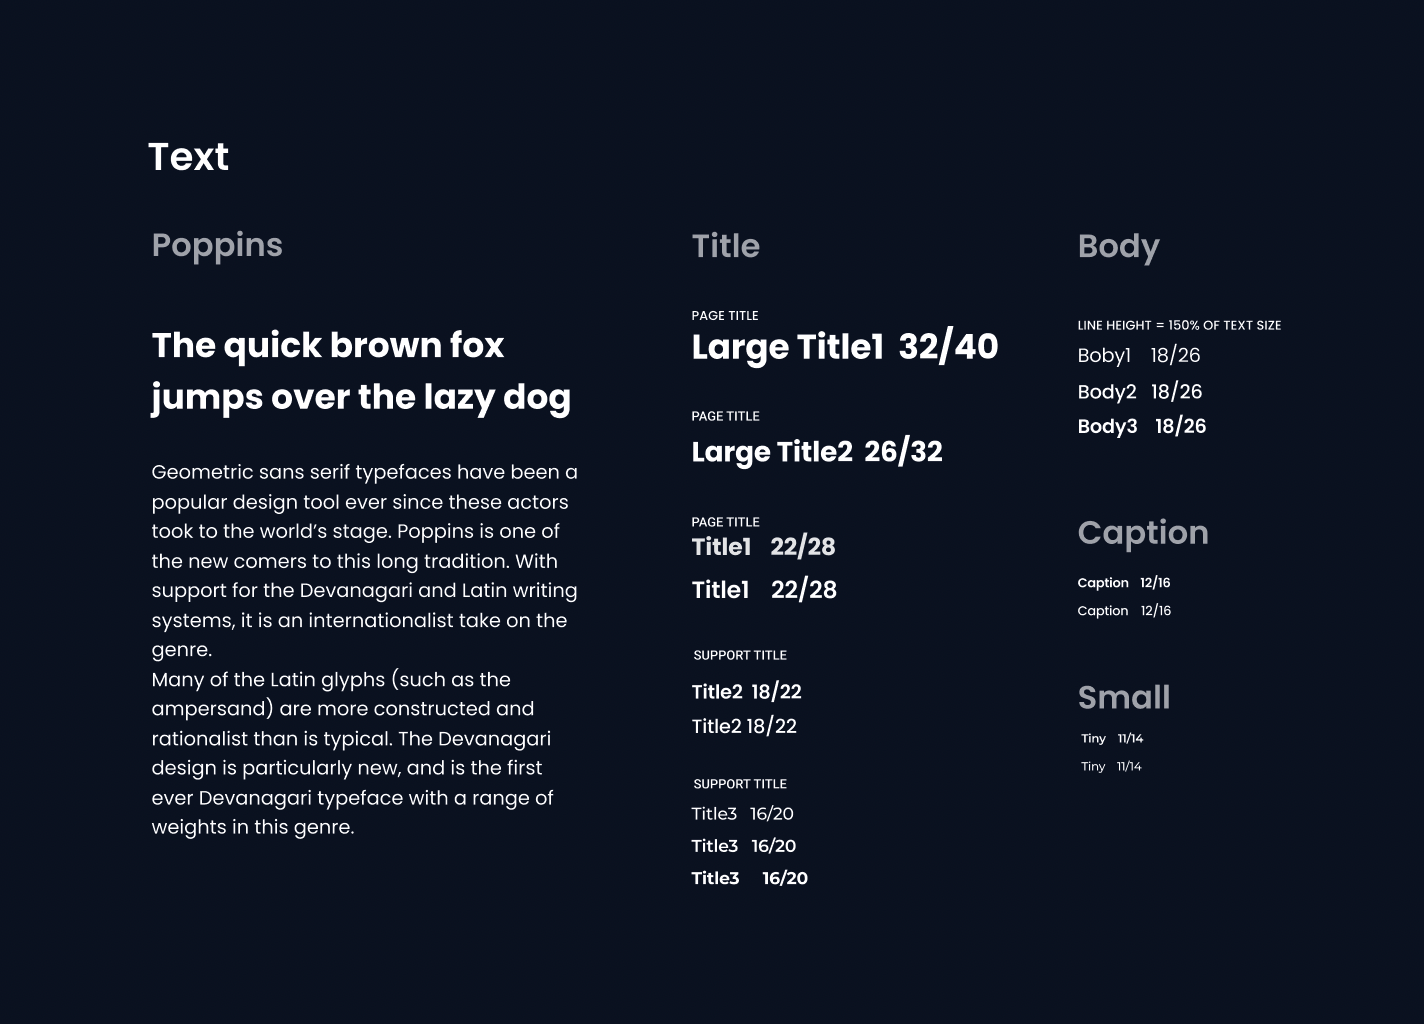 tradesk-design-system-text-style